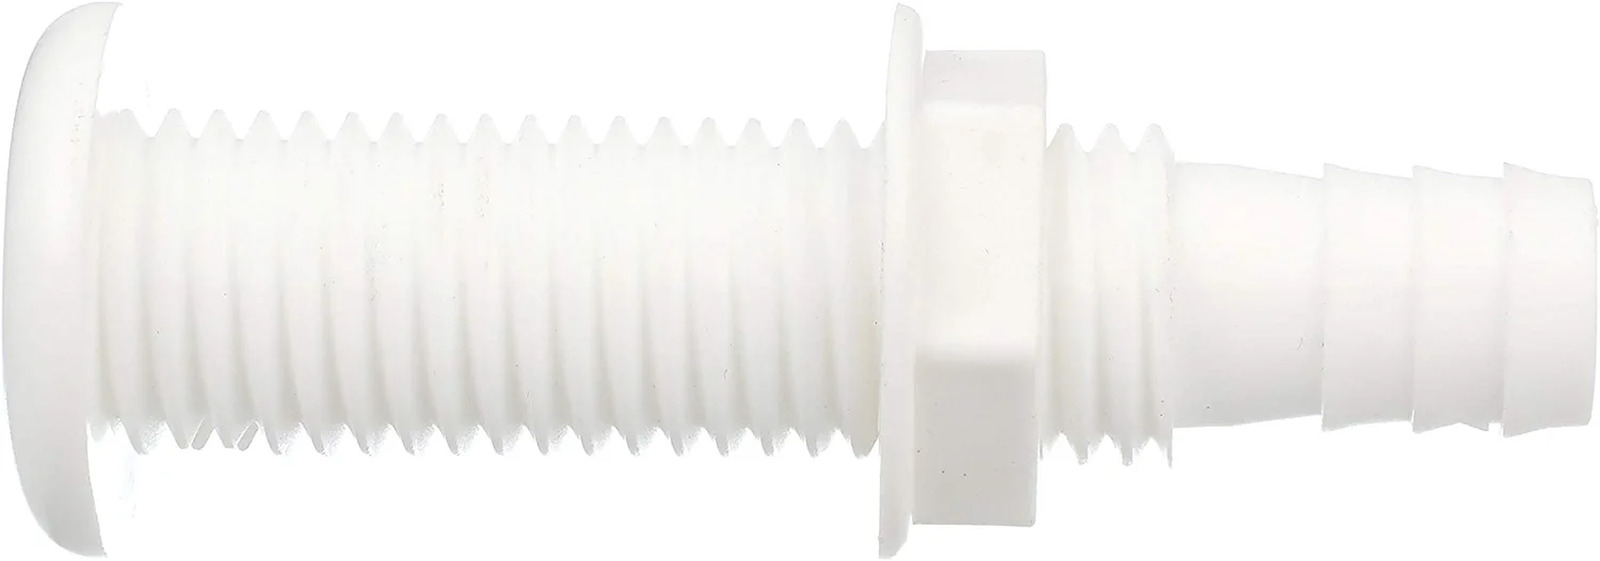 Polypropylene Extra Long Thru-hull Connector For 3/4 In. Id Hose, White Finish